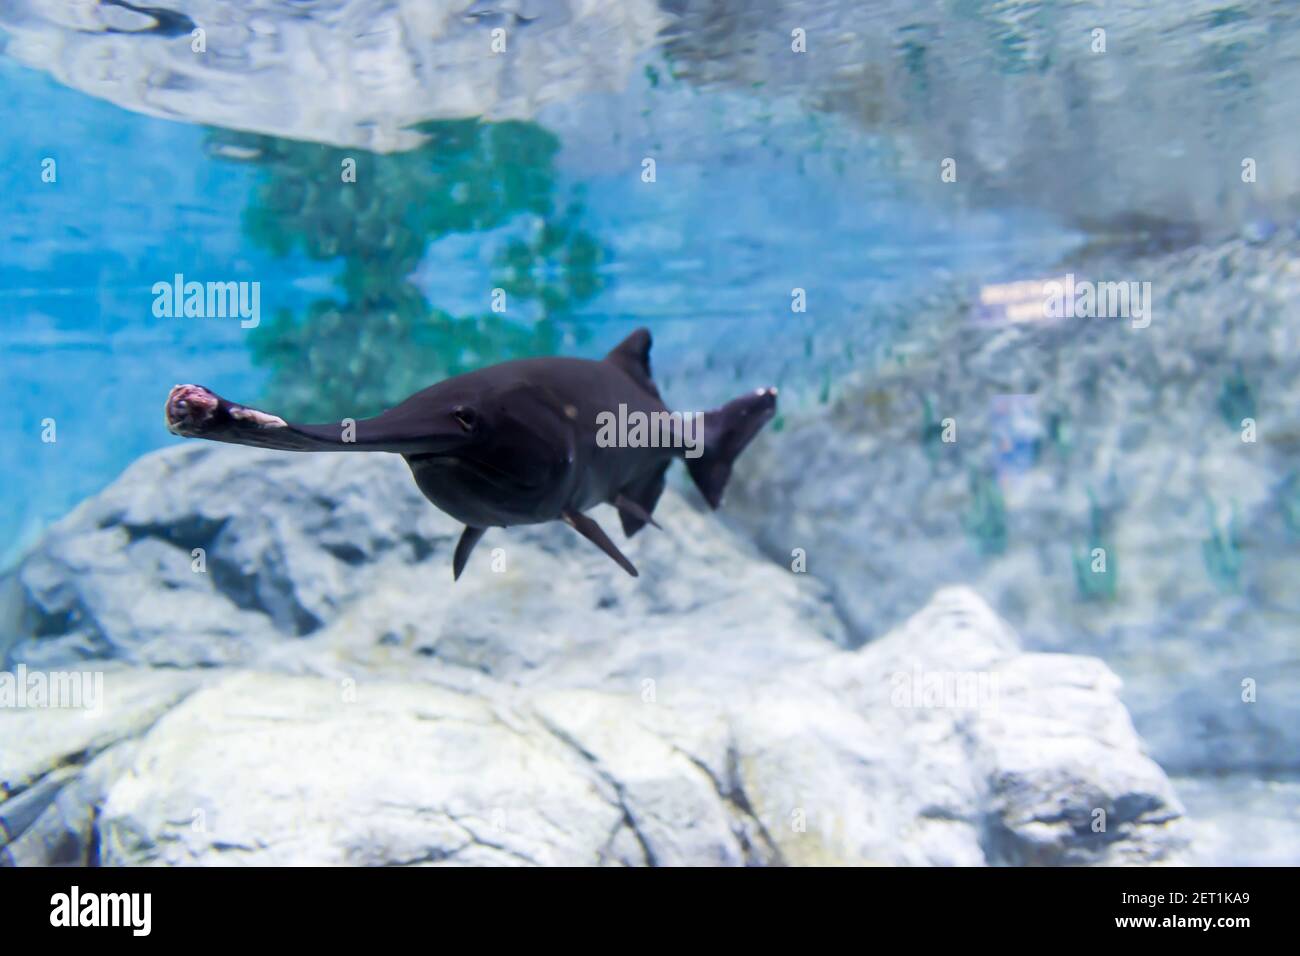 Blurry photo of a wounded black aligator gar in a clear sea aquarium. Chinese paddlefish Stock Photo